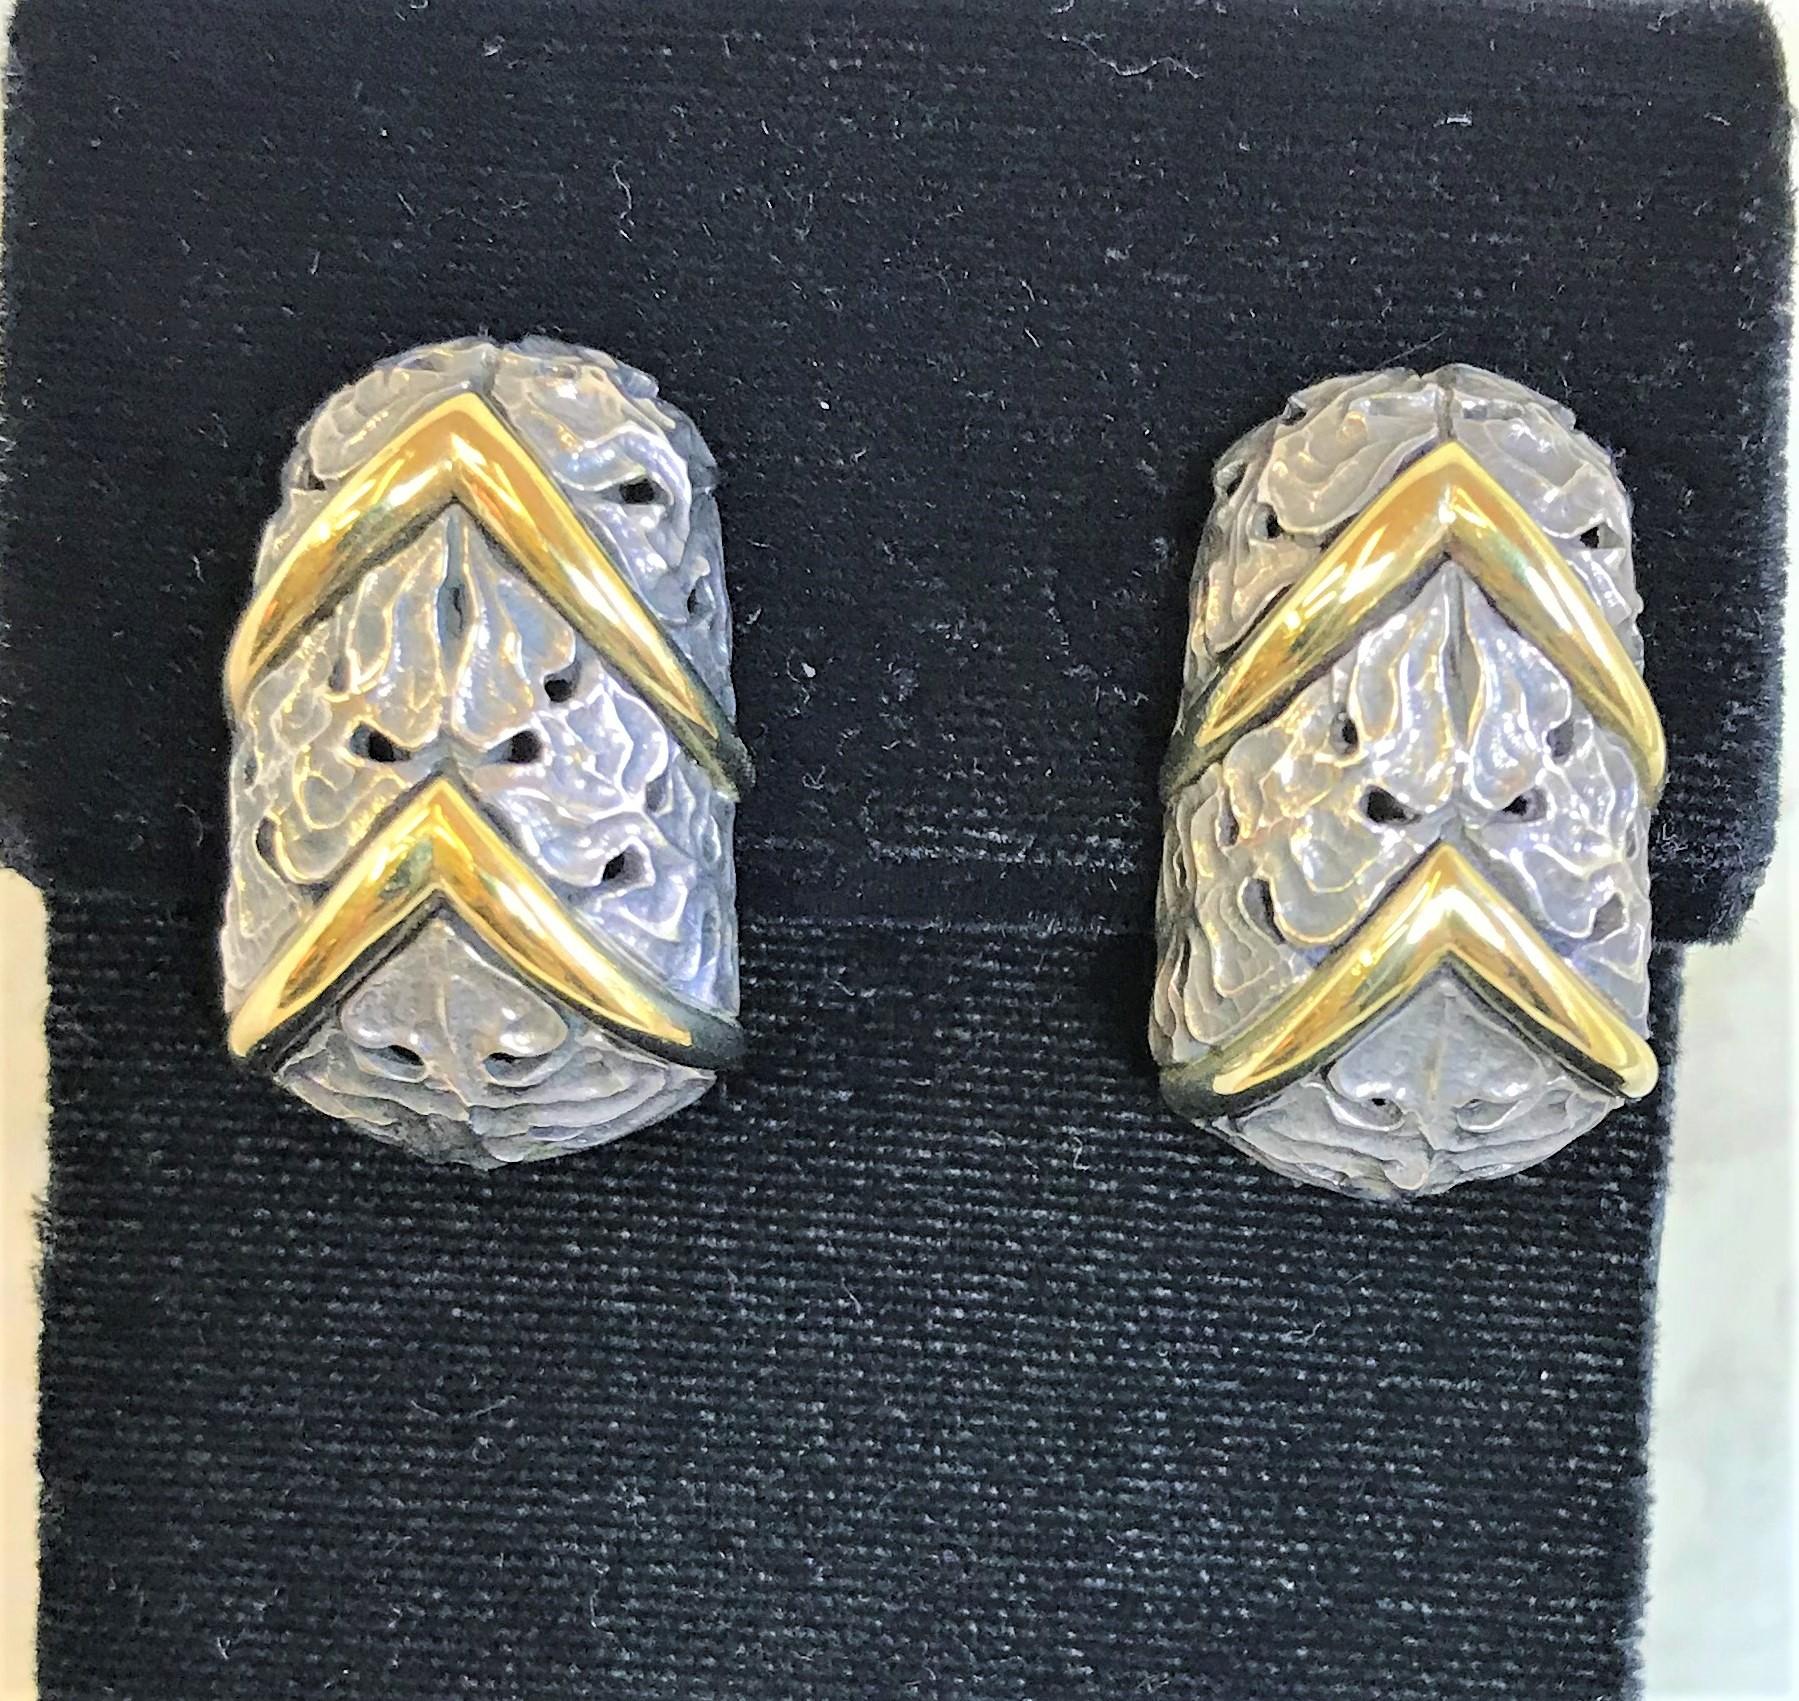 Mitchell Peck
Sterling silver floral design earrings with 18 karat yellow gold chevron pattern
Approximately 1 inch long and .5 inches at the widest 
Stamped 